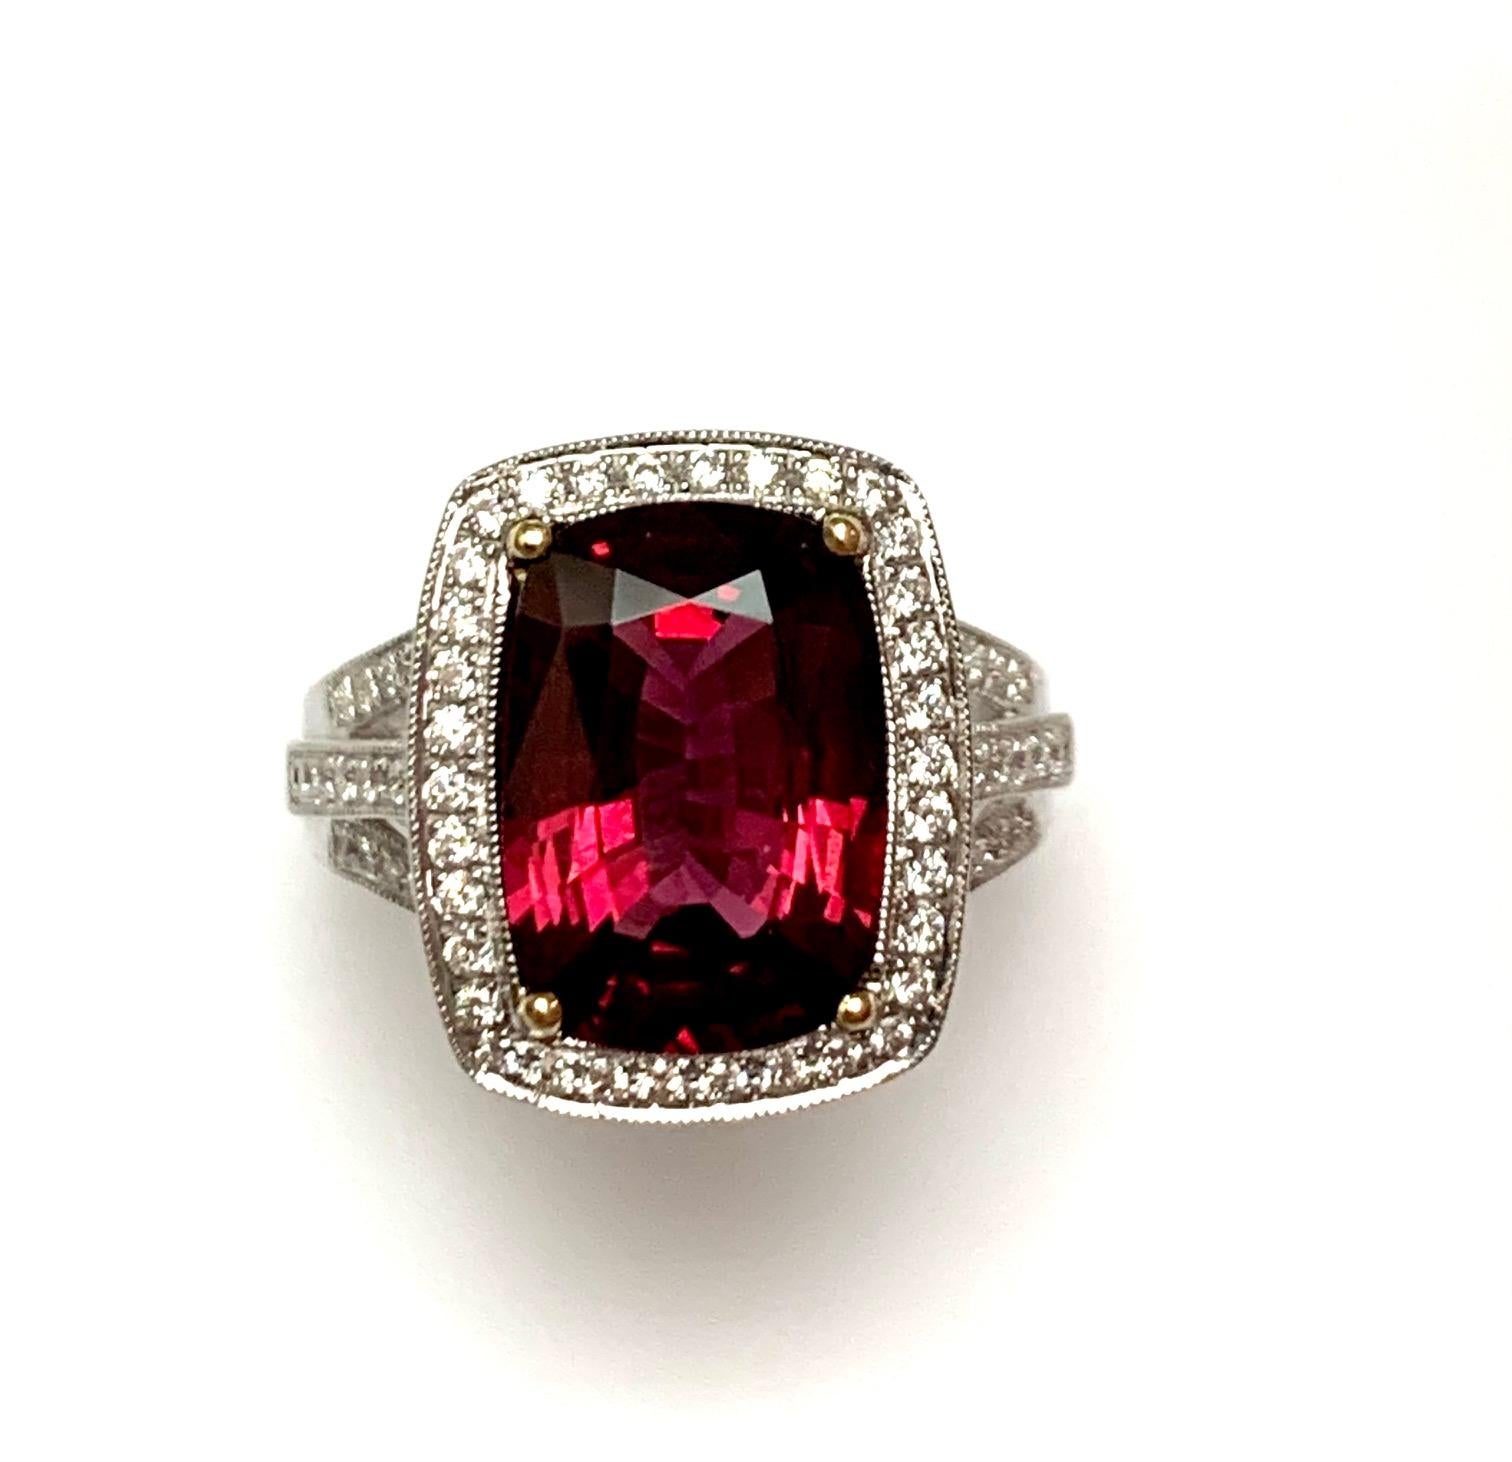 5.43 Carat Cushion shape red spinel set in 18kw ring  along with 0.47 ct G-h cealn vs Diamonds pave set around ,in the gallery, and half way on the triple split shank .